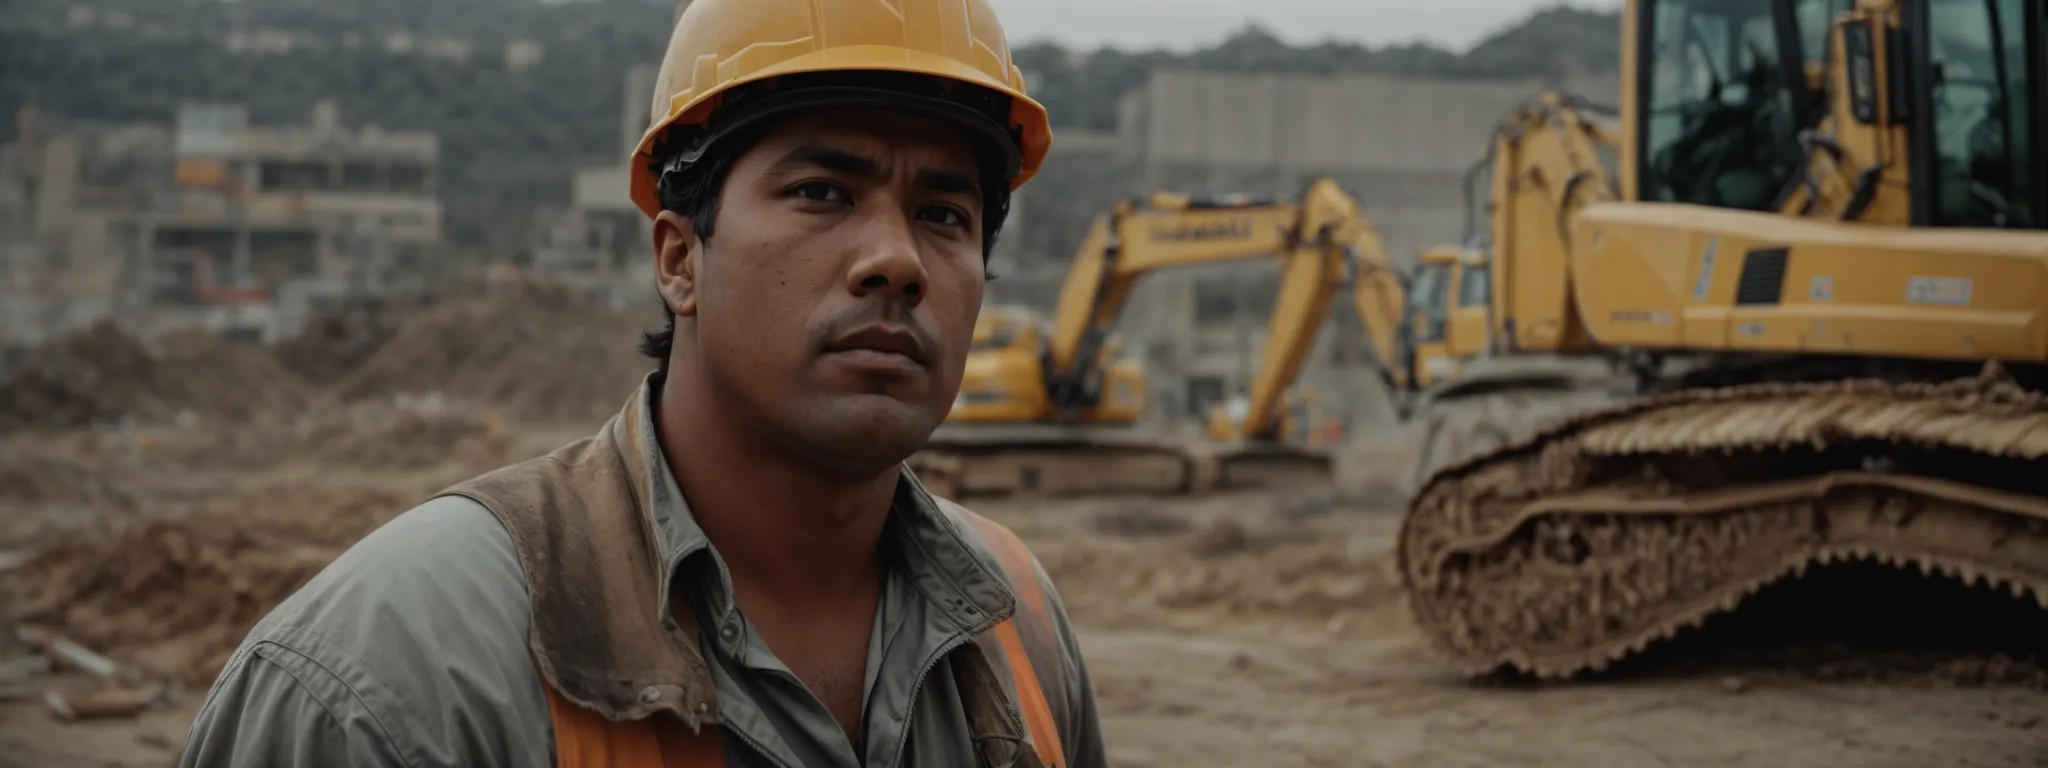 a troubled construction worker gazes at heavy machinery at a halted construction site.